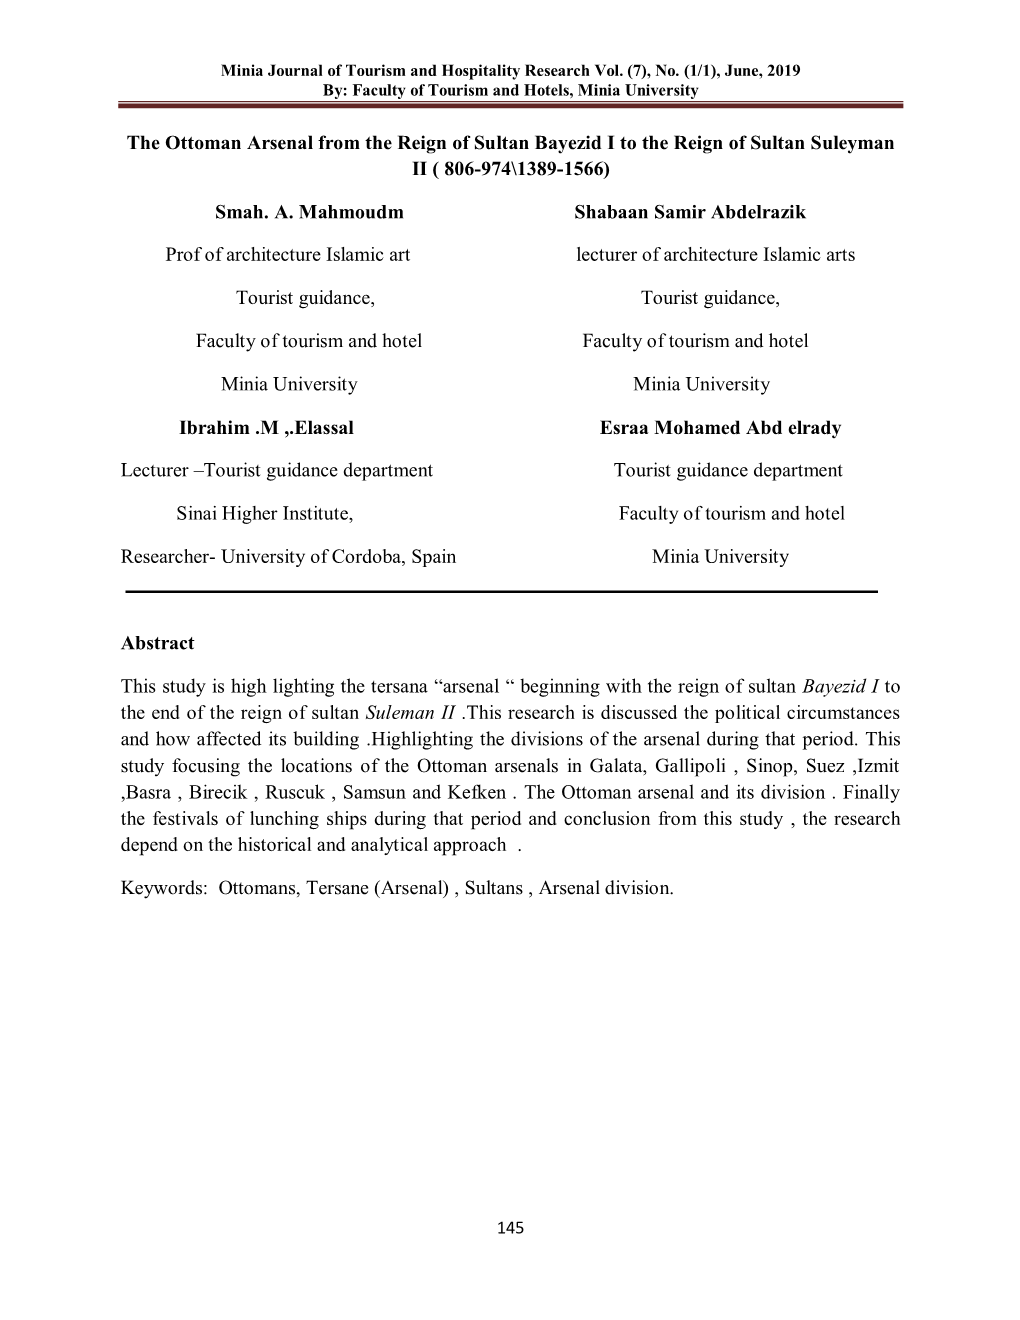 Minia Journal of Tourism and Hospitality Research Vol. (7), No. (1/1), June, 2019 By: Faculty of Tourism and Hotels, Minia University